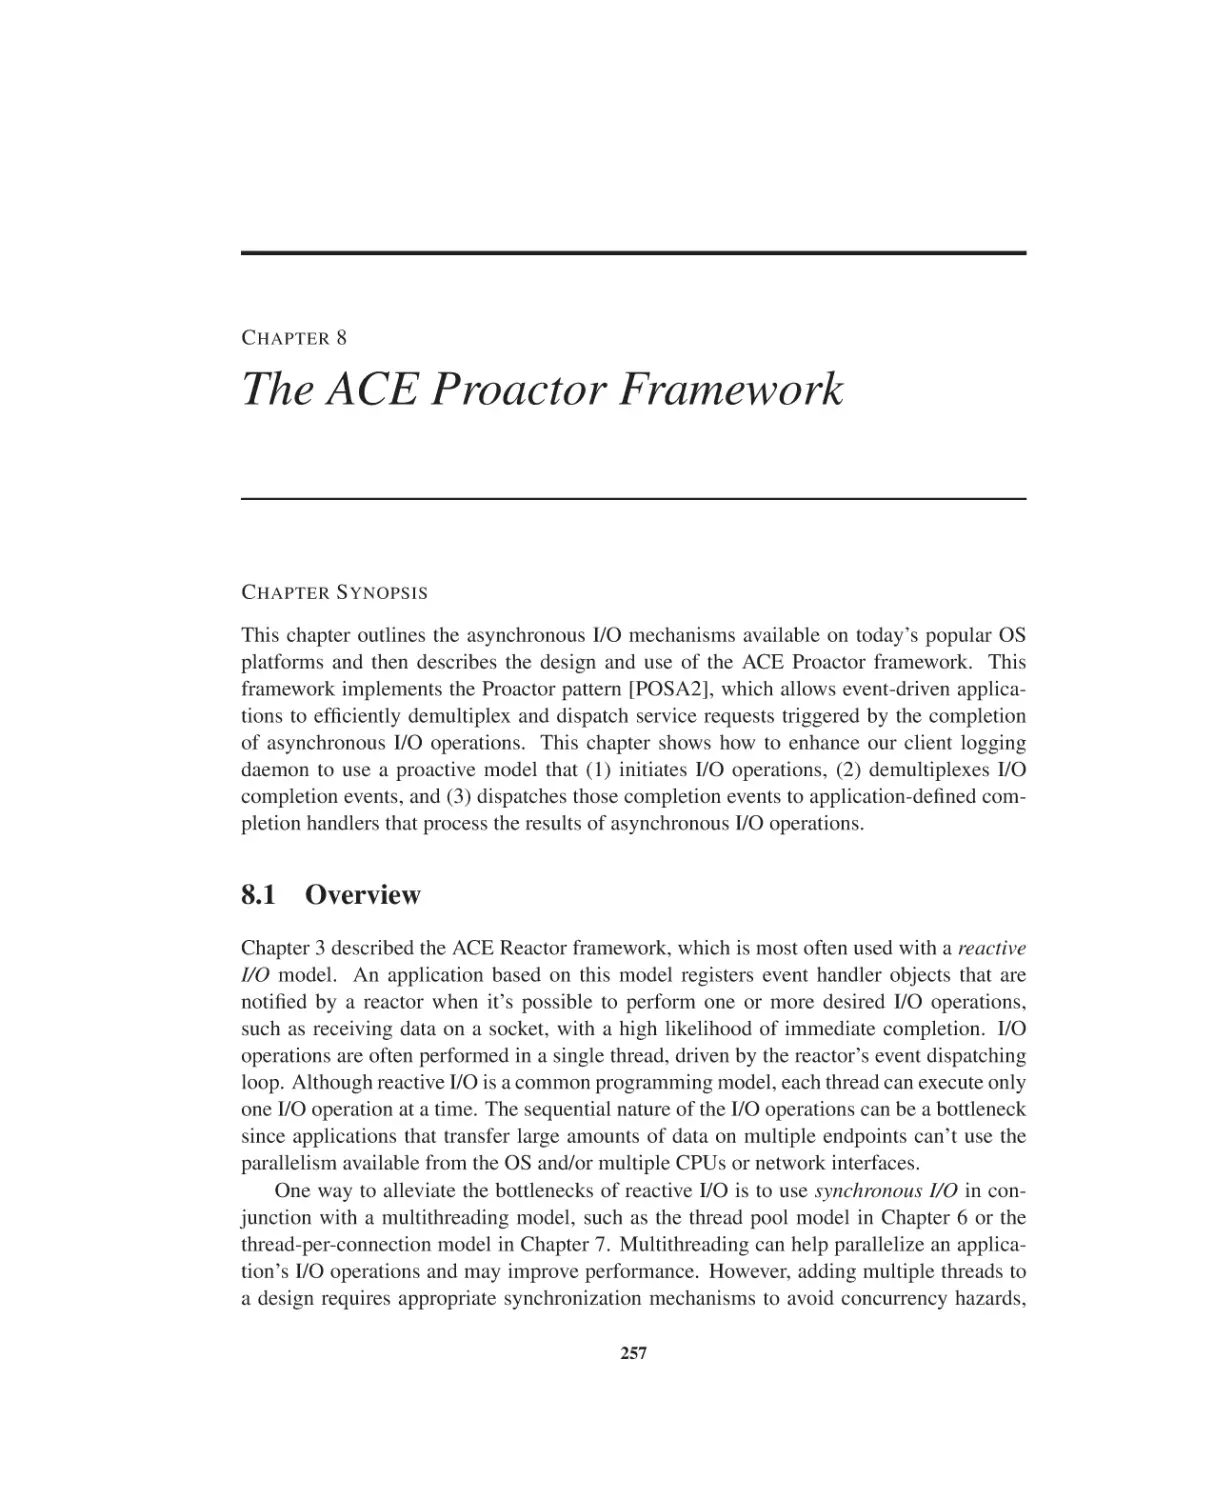 Chapter 8 The ACE Proactor Framework
8.1 Overview